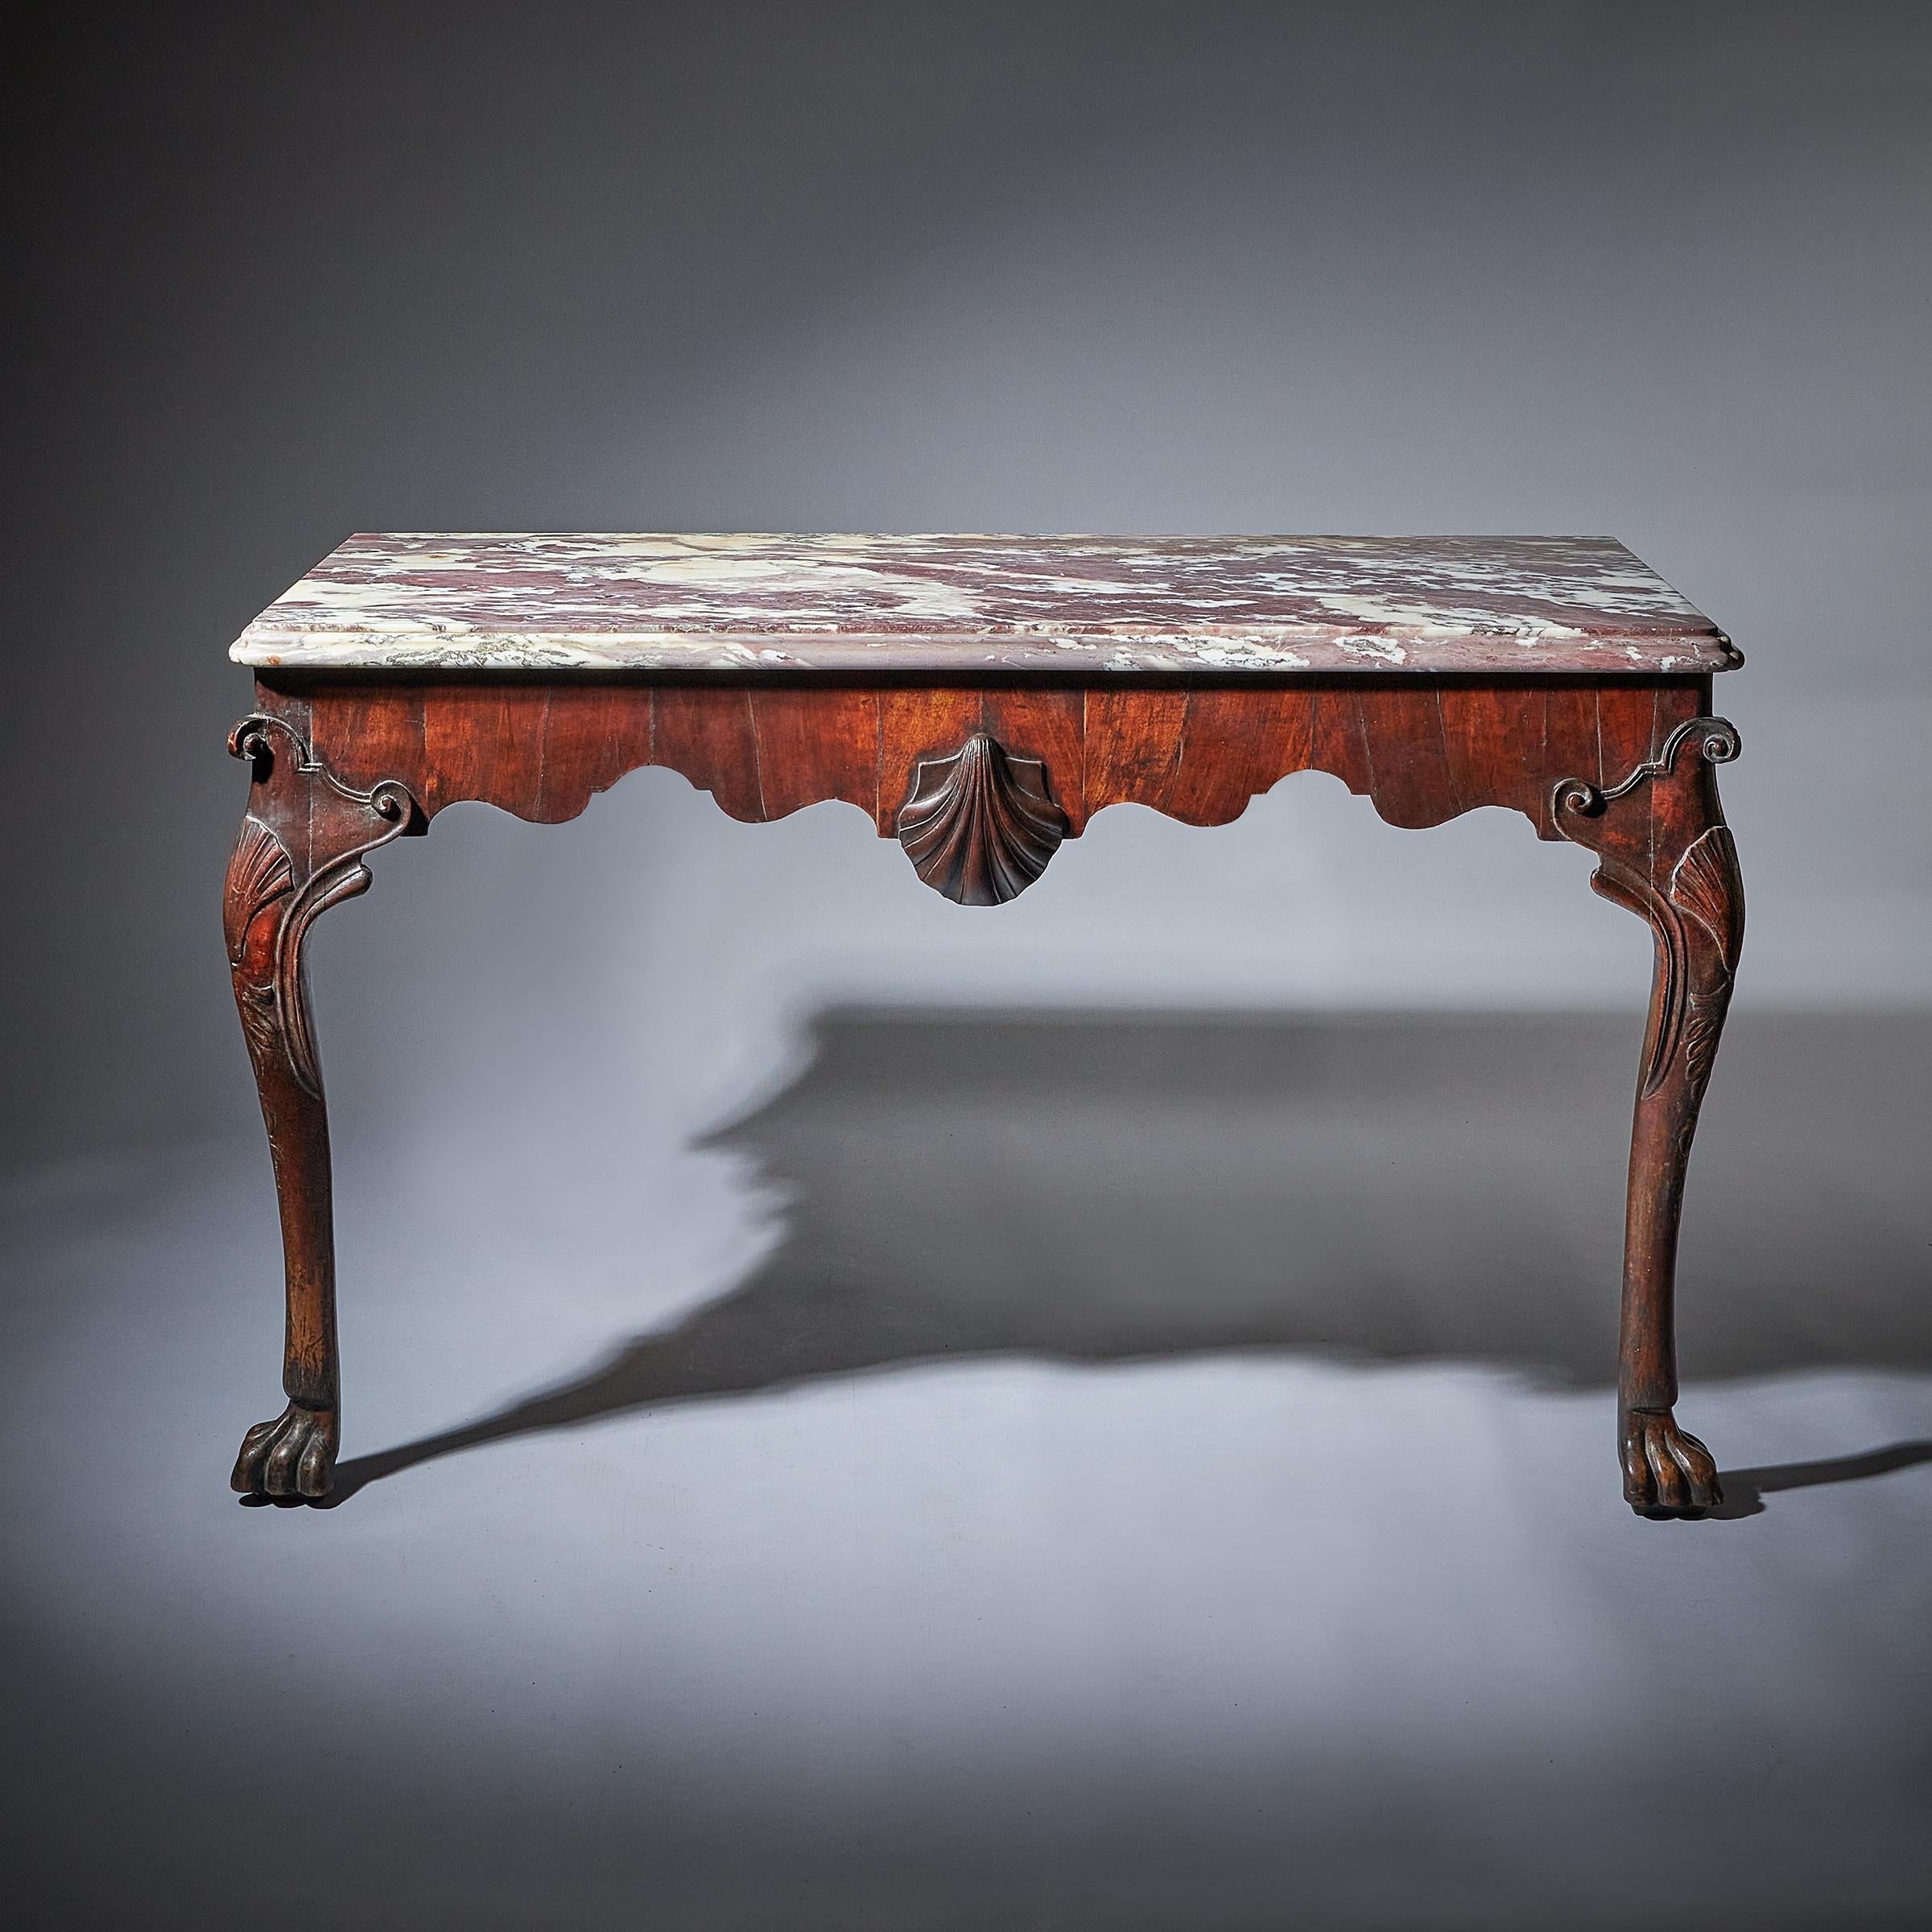 A rare and important pair of George II irish walnut console tables
C.1730. Ireland

Each with a moulded breccia viola top, above a shaped frieze, centred with a carved scallop shell, on scroll, shell, leaf and husk capped legs and lion's paw